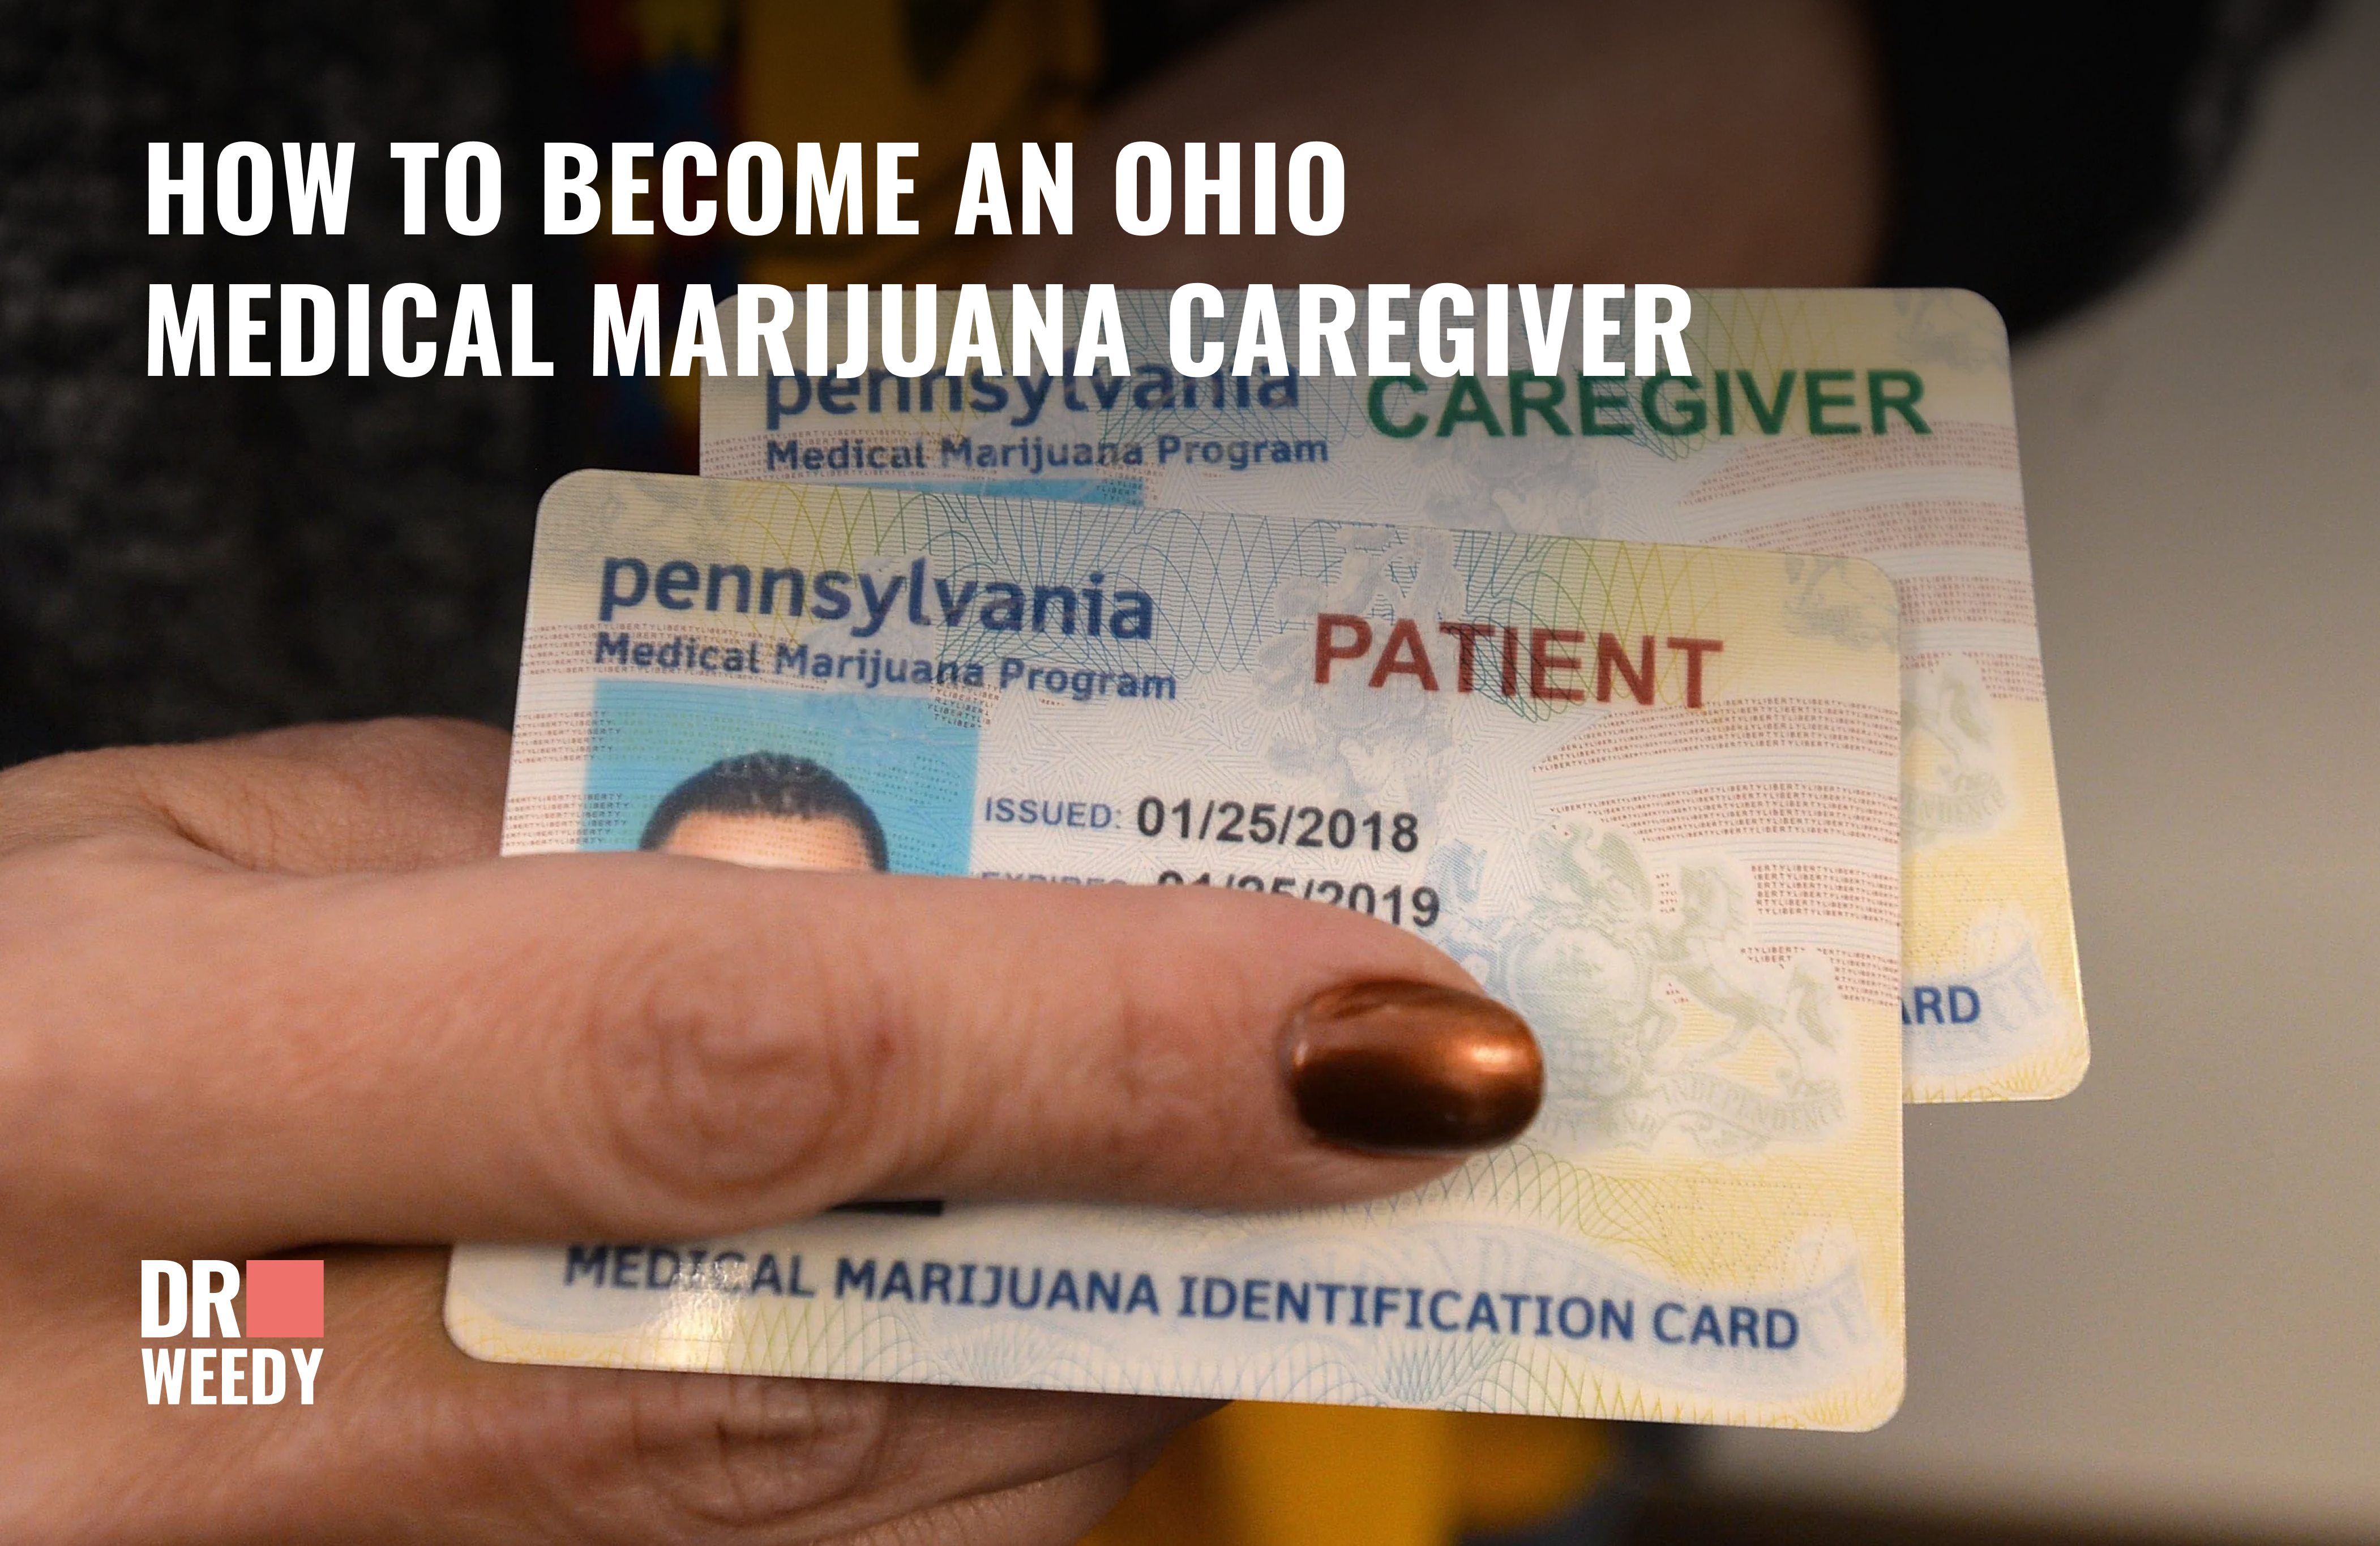 Becoming a Medical Marijuana Caregiver in Ohio: A Step-by-Step Guide